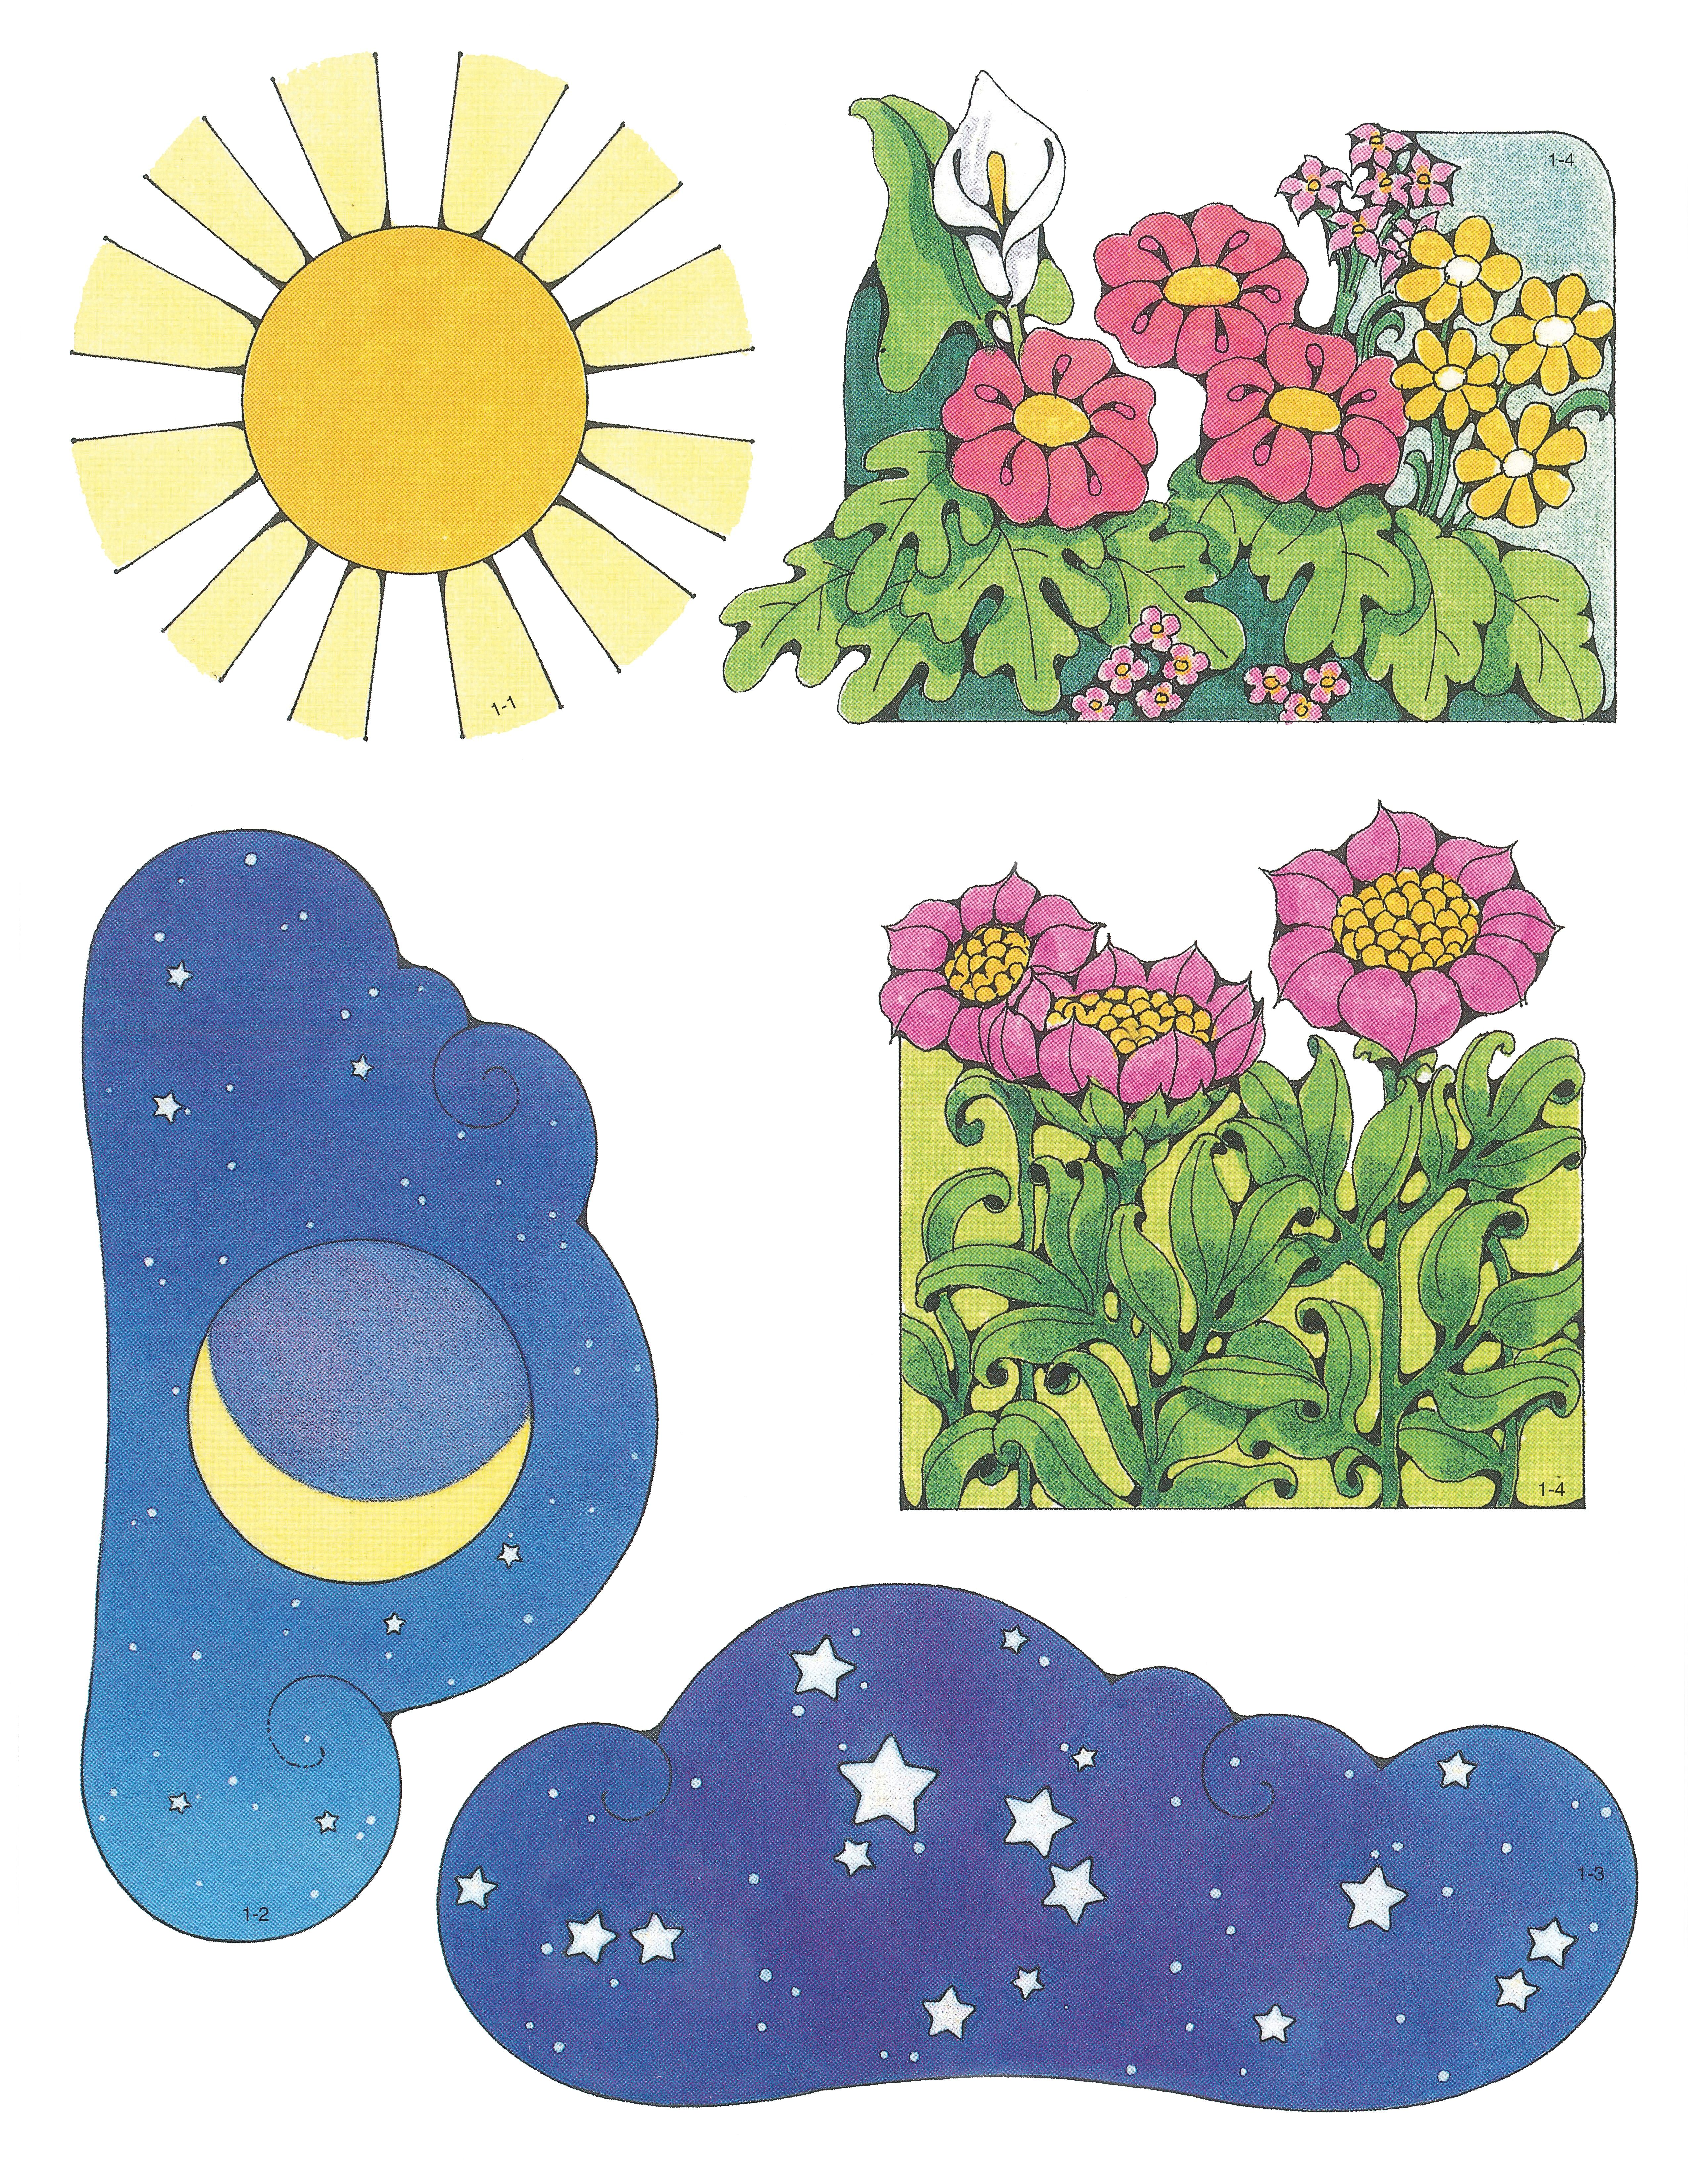 Primary 1: I Am a Child of God Cutouts 1-1, Sun; 1-2, Moon; 1-3, Stars; 1-4, Flowers.